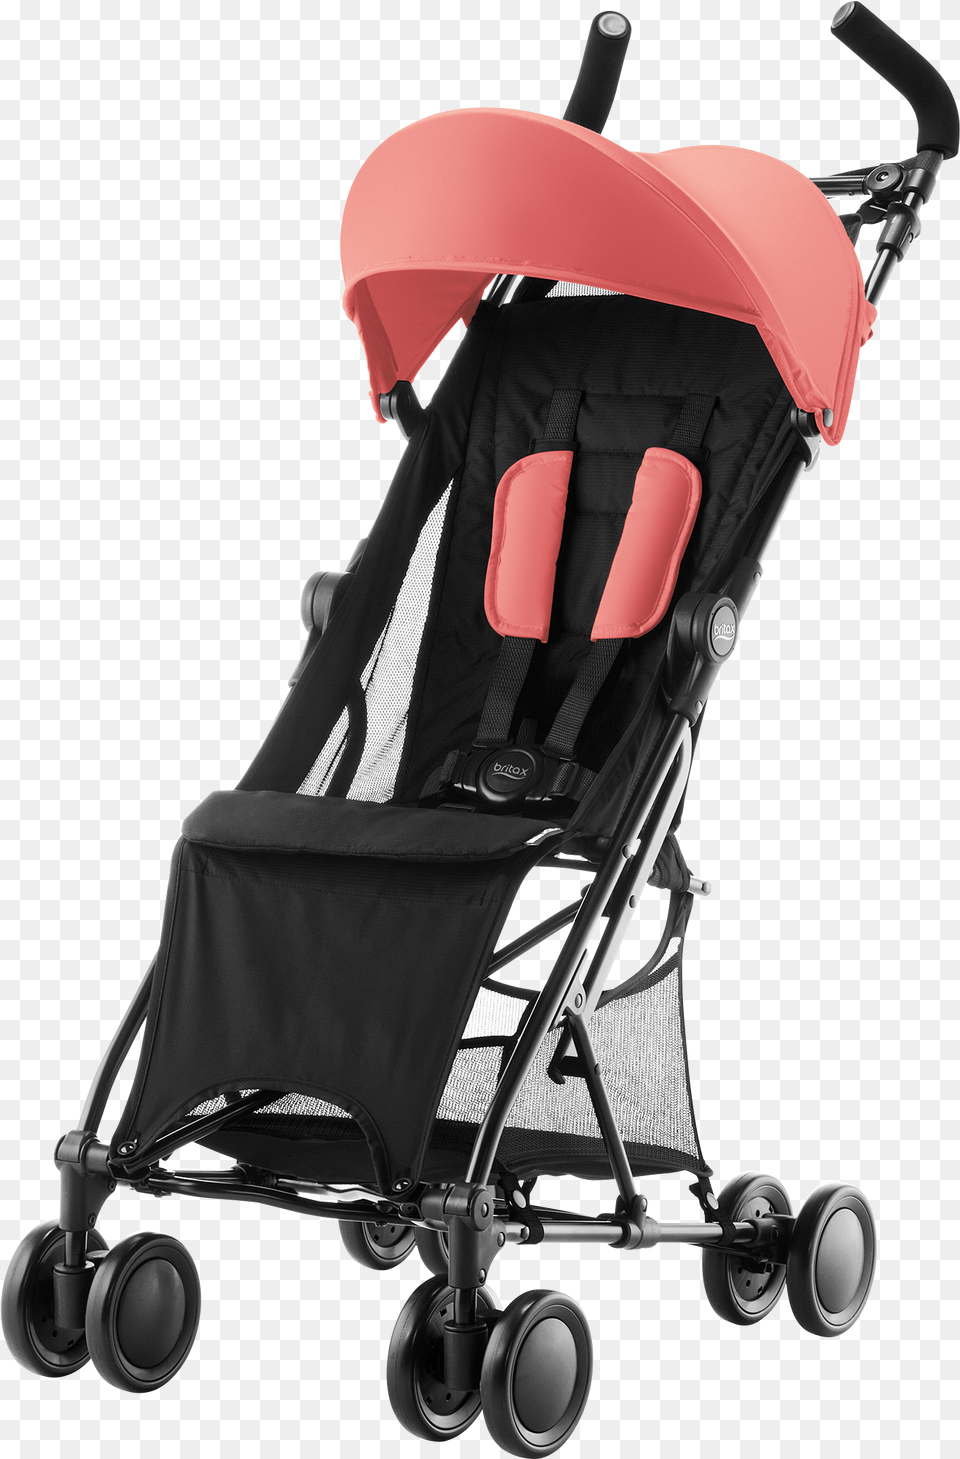 Britax Britax Holiday Coral Peach Britax Rmer Buggy Holiday, Stroller, E-scooter, Transportation, Vehicle Png Image